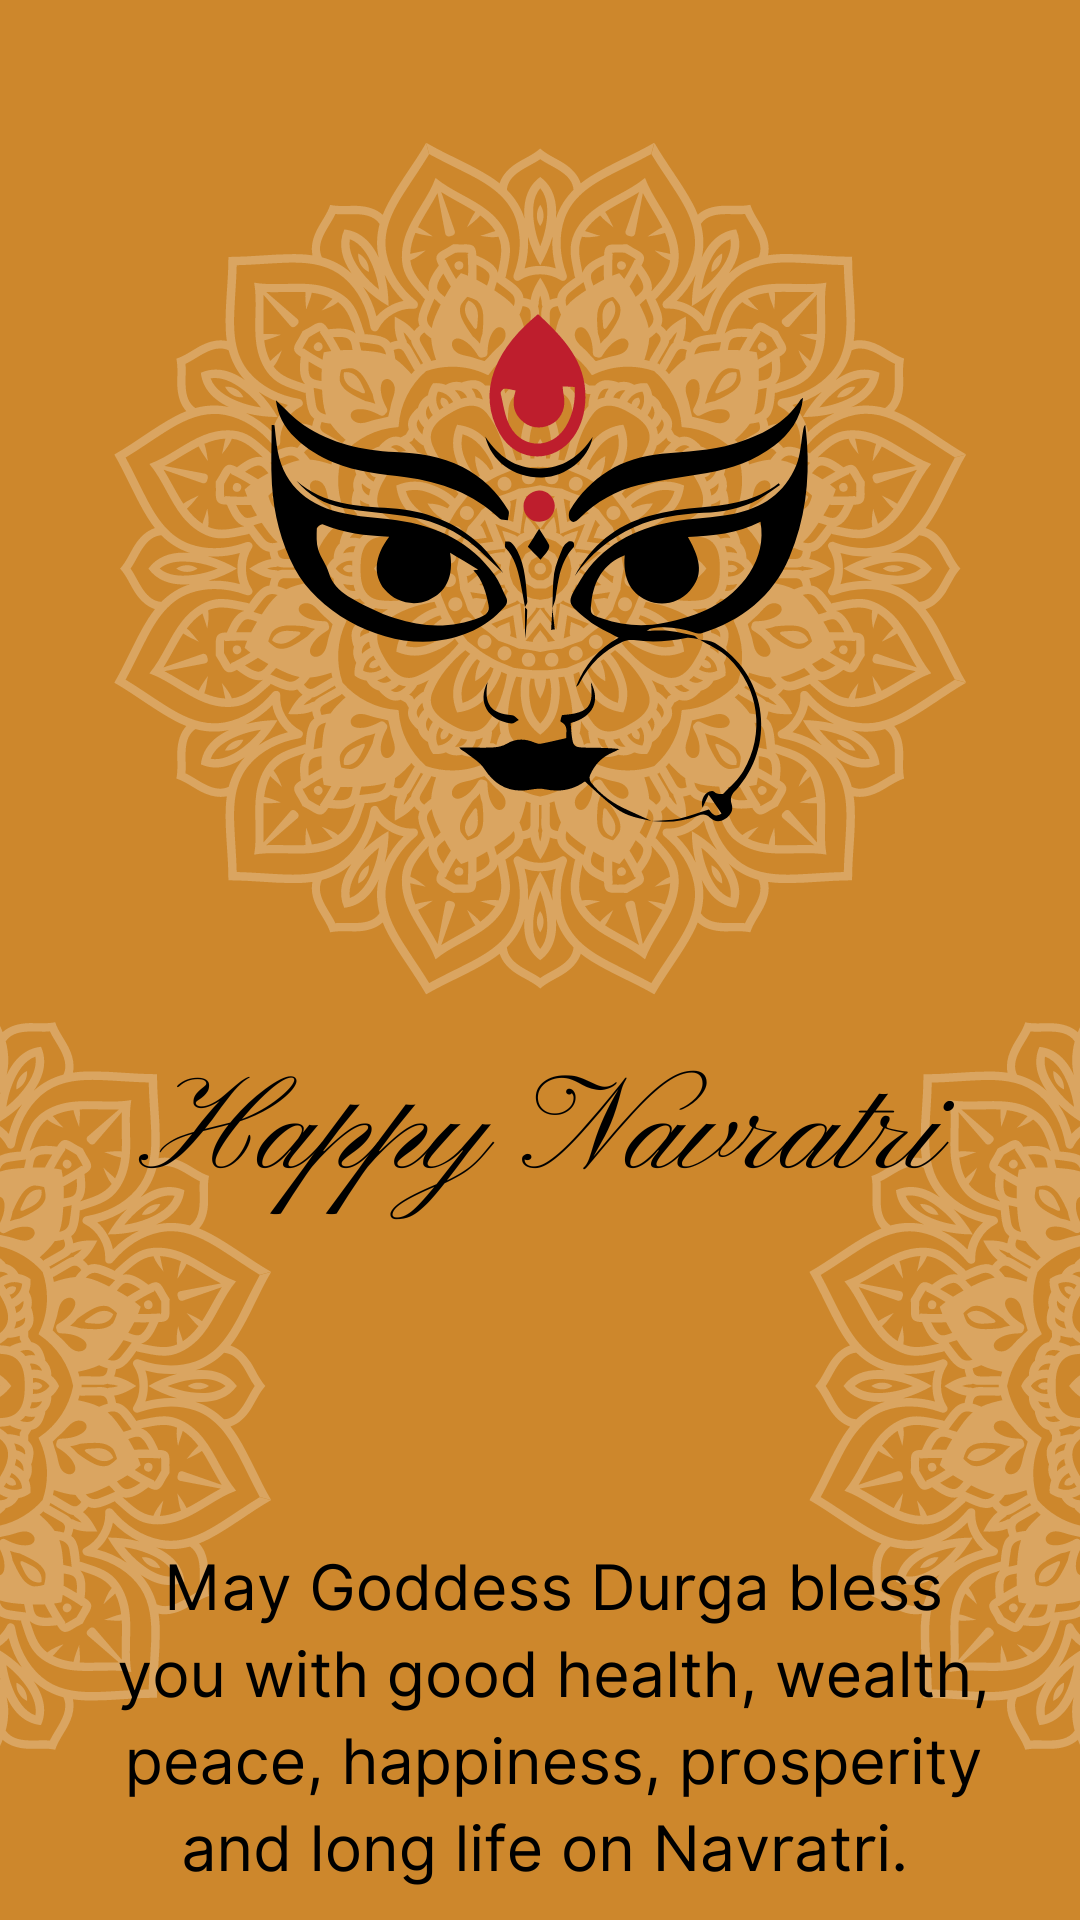 #{"id":72,"_id":"61f3f785e0f744570541c077","name":"navratri-wishes","count":42,"data":"{\"_id\":{\"$oid\":\"61f3f785e0f744570541c077\"},\"id\":\"46\",\"name\":\"navratri-wishes\",\"created_at\":\"2020-10-15-18:56:19\",\"updated_at\":\"2020-10-15-18:56:19\",\"updatedAt\":{\"$date\":\"2022-01-28T14:33:44.922Z\"},\"count\":42}","deleted_at":null,"created_at":"2020-10-15T06:56:19.000000Z","updated_at":"2020-10-15T06:56:19.000000Z","merge_with":null,"pivot":{"taggable_id":2329,"tag_id":72,"taggable_type":"App\\Models\\Status"}}, #{"id":69,"_id":"61f3f785e0f744570541c074","name":"navratri-image","count":2,"data":"{\"_id\":{\"$oid\":\"61f3f785e0f744570541c074\"},\"id\":\"43\",\"name\":\"navratri-image\",\"created_at\":\"2020-10-15-18:56:00\",\"updated_at\":\"2020-10-15-18:56:00\",\"updatedAt\":{\"$date\":\"2022-01-28T14:33:44.886Z\"},\"count\":2}","deleted_at":null,"created_at":"2020-10-15T06:56:00.000000Z","updated_at":"2020-10-15T06:56:00.000000Z","merge_with":null,"pivot":{"taggable_id":2329,"tag_id":69,"taggable_type":"App\\Models\\Status"}}, #{"id":72,"_id":"61f3f785e0f744570541c077","name":"navratri-wishes","count":42,"data":"{\"_id\":{\"$oid\":\"61f3f785e0f744570541c077\"},\"id\":\"46\",\"name\":\"navratri-wishes\",\"created_at\":\"2020-10-15-18:56:19\",\"updated_at\":\"2020-10-15-18:56:19\",\"updatedAt\":{\"$date\":\"2022-01-28T14:33:44.922Z\"},\"count\":42}","deleted_at":null,"created_at":"2020-10-15T06:56:19.000000Z","updated_at":"2020-10-15T06:56:19.000000Z","merge_with":null,"pivot":{"taggable_id":2329,"tag_id":72,"taggable_type":"App\\Models\\Status"}}, #{"id":2511,"_id":null,"name":"happy-navratri-2023","count":0,"data":null,"deleted_at":null,"created_at":"2023-09-06T12:27:27.000000Z","updated_at":"2023-09-06T12:27:27.000000Z","merge_with":null,"pivot":{"taggable_id":2329,"tag_id":2511,"taggable_type":"App\\Models\\Status"}}, #{"id":1322,"_id":"61f3f785e0f744570541c29b","name":"happy-chaitra-navratri","count":38,"data":"{\"_id\":{\"$oid\":\"61f3f785e0f744570541c29b\"},\"id\":\"594\",\"name\":\"happy-chaitra-navratri\",\"created_at\":\"2021-03-30-12:46:39\",\"updated_at\":\"2021-03-30-12:46:39\",\"updatedAt\":{\"$date\":\"2022-01-28T14:33:44.922Z\"},\"count\":38}","deleted_at":null,"created_at":"2021-03-30T12:46:39.000000Z","updated_at":"2021-03-30T12:46:39.000000Z","merge_with":null,"pivot":{"taggable_id":2329,"tag_id":1322,"taggable_type":"App\\Models\\Status"}}, #{"id":1355,"_id":"61f3f785e0f744570541c2bc","name":"happy-navratri-wishes","count":1,"data":"{\"_id\":{\"$oid\":\"61f3f785e0f744570541c2bc\"},\"id\":\"627\",\"name\":\"happy-navratri-wishes\",\"created_at\":\"2021-04-01-18:44:13\",\"updated_at\":\"2021-04-01-18:44:13\",\"updatedAt\":{\"$date\":\"2022-01-28T14:33:44.924Z\"},\"count\":1}","deleted_at":null,"created_at":"2021-04-01T06:44:13.000000Z","updated_at":"2021-04-01T06:44:13.000000Z","merge_with":null,"pivot":{"taggable_id":2329,"tag_id":1355,"taggable_type":"App\\Models\\Status"}}